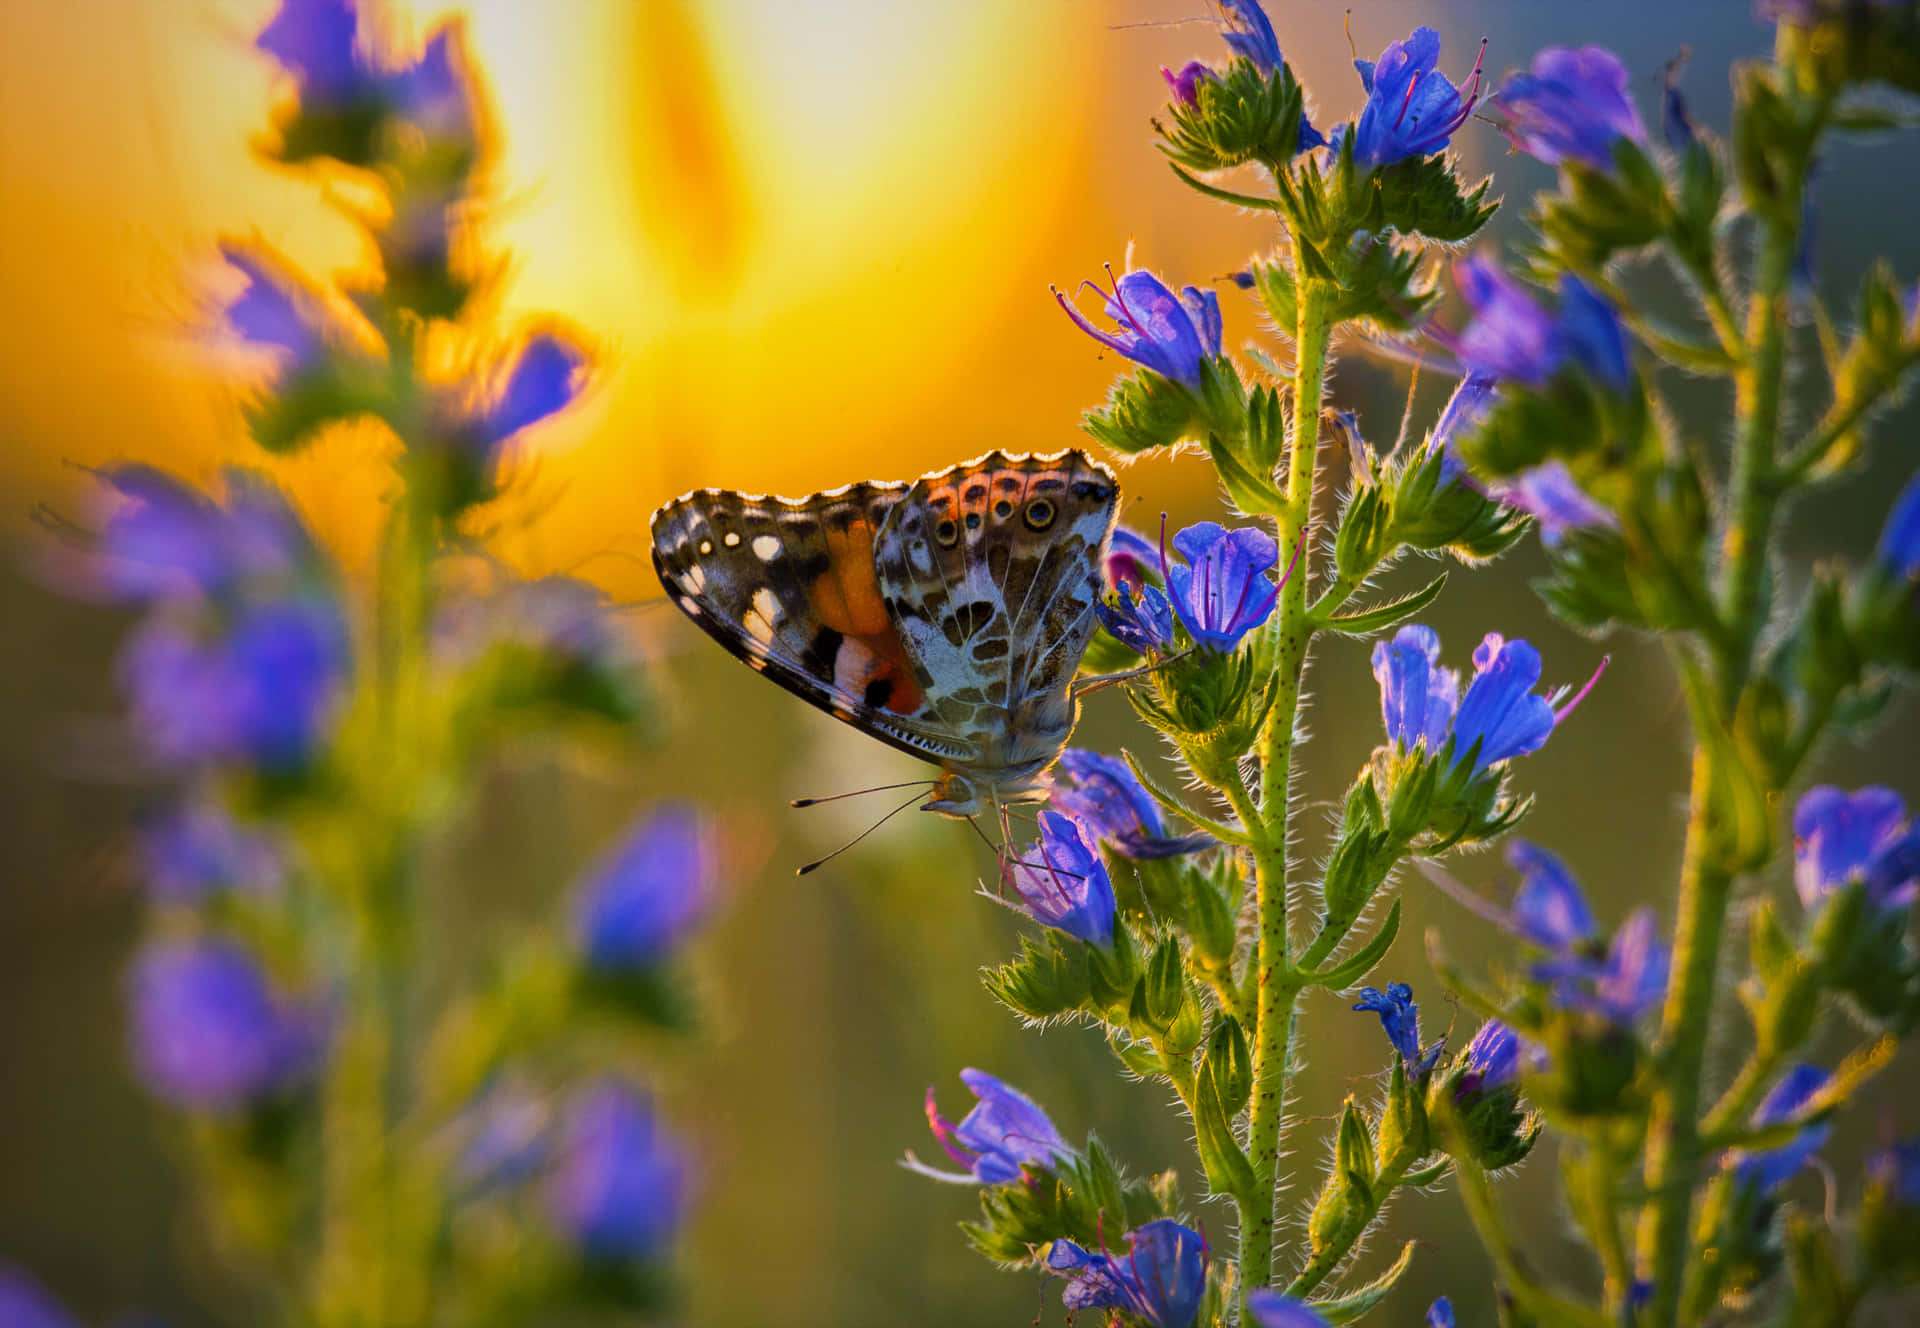 Let the beauty of the butterflies fill you with joy.